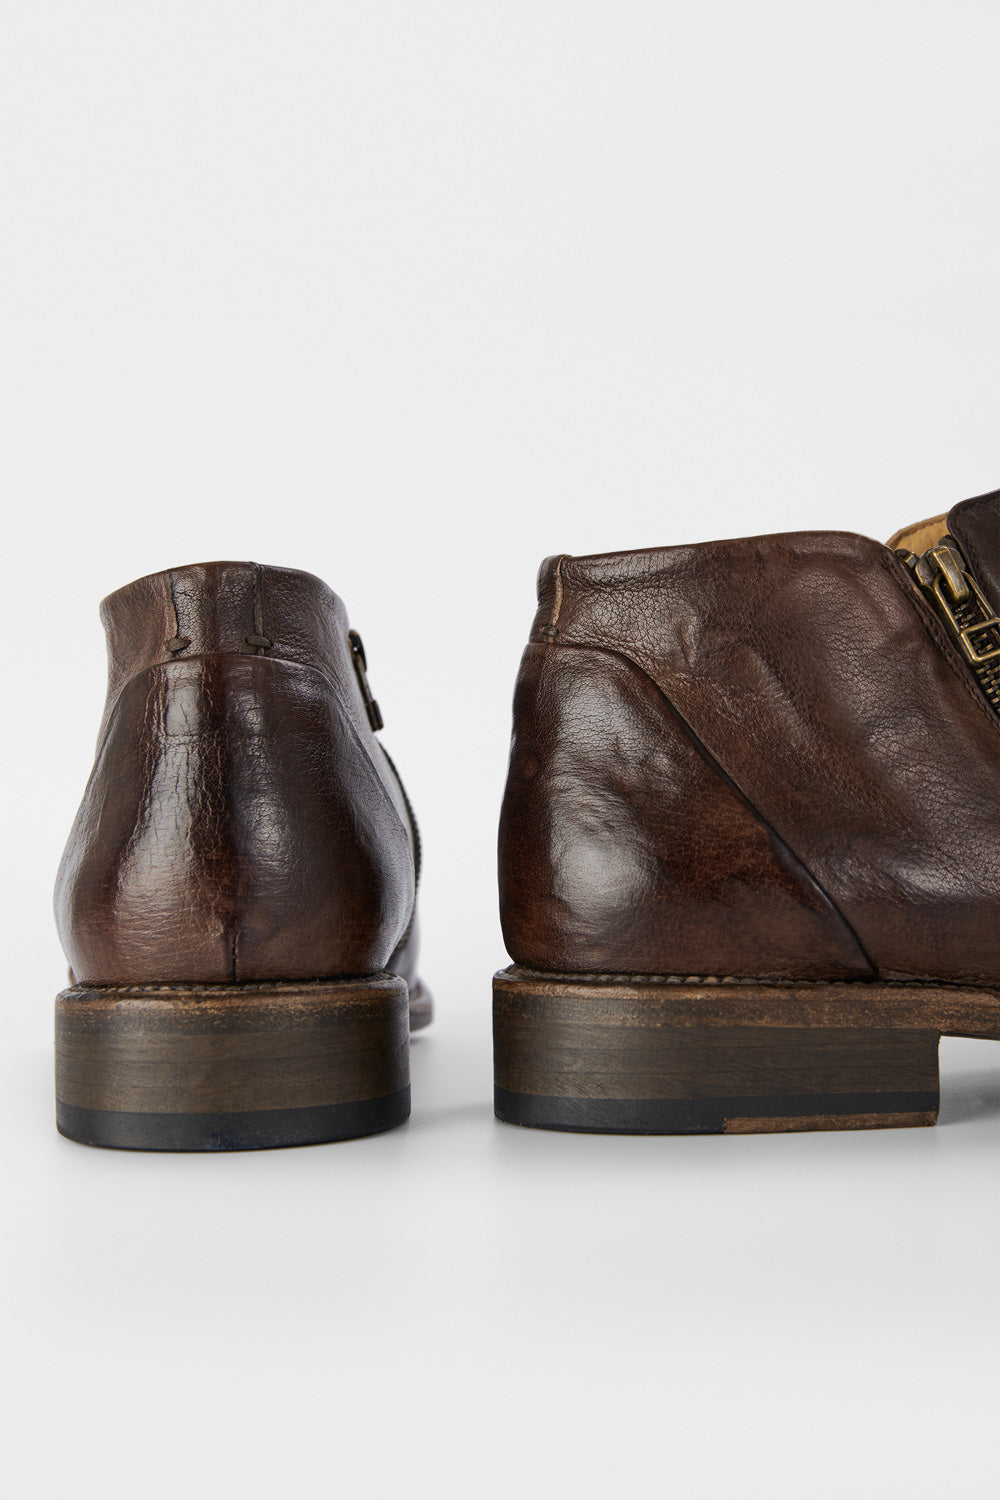 KNIGHTON noble-brown double-zip low ankle boots | untamed street | men ...